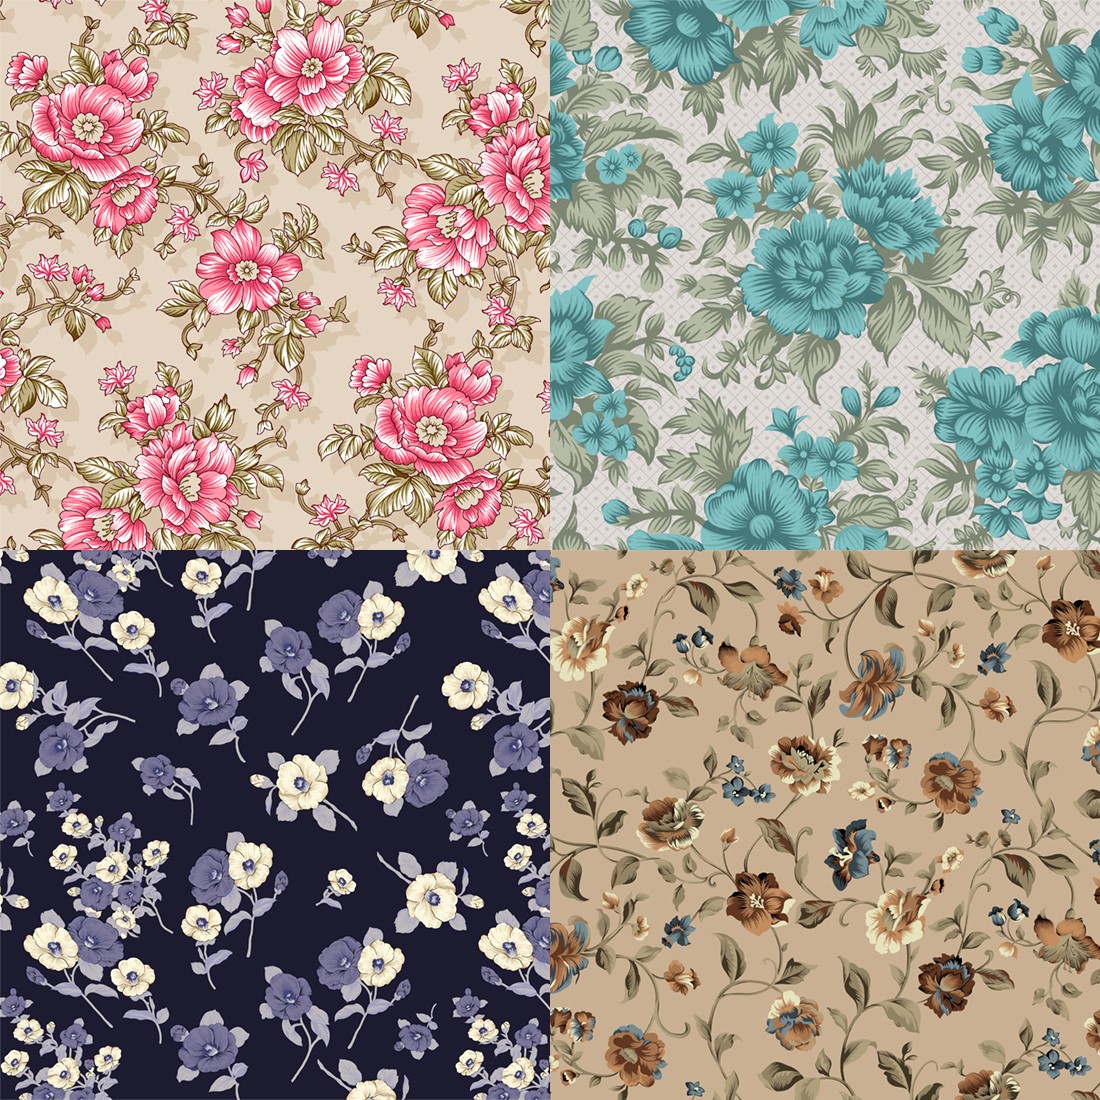 Floral Seamless Patterns for Textile Design cover image.